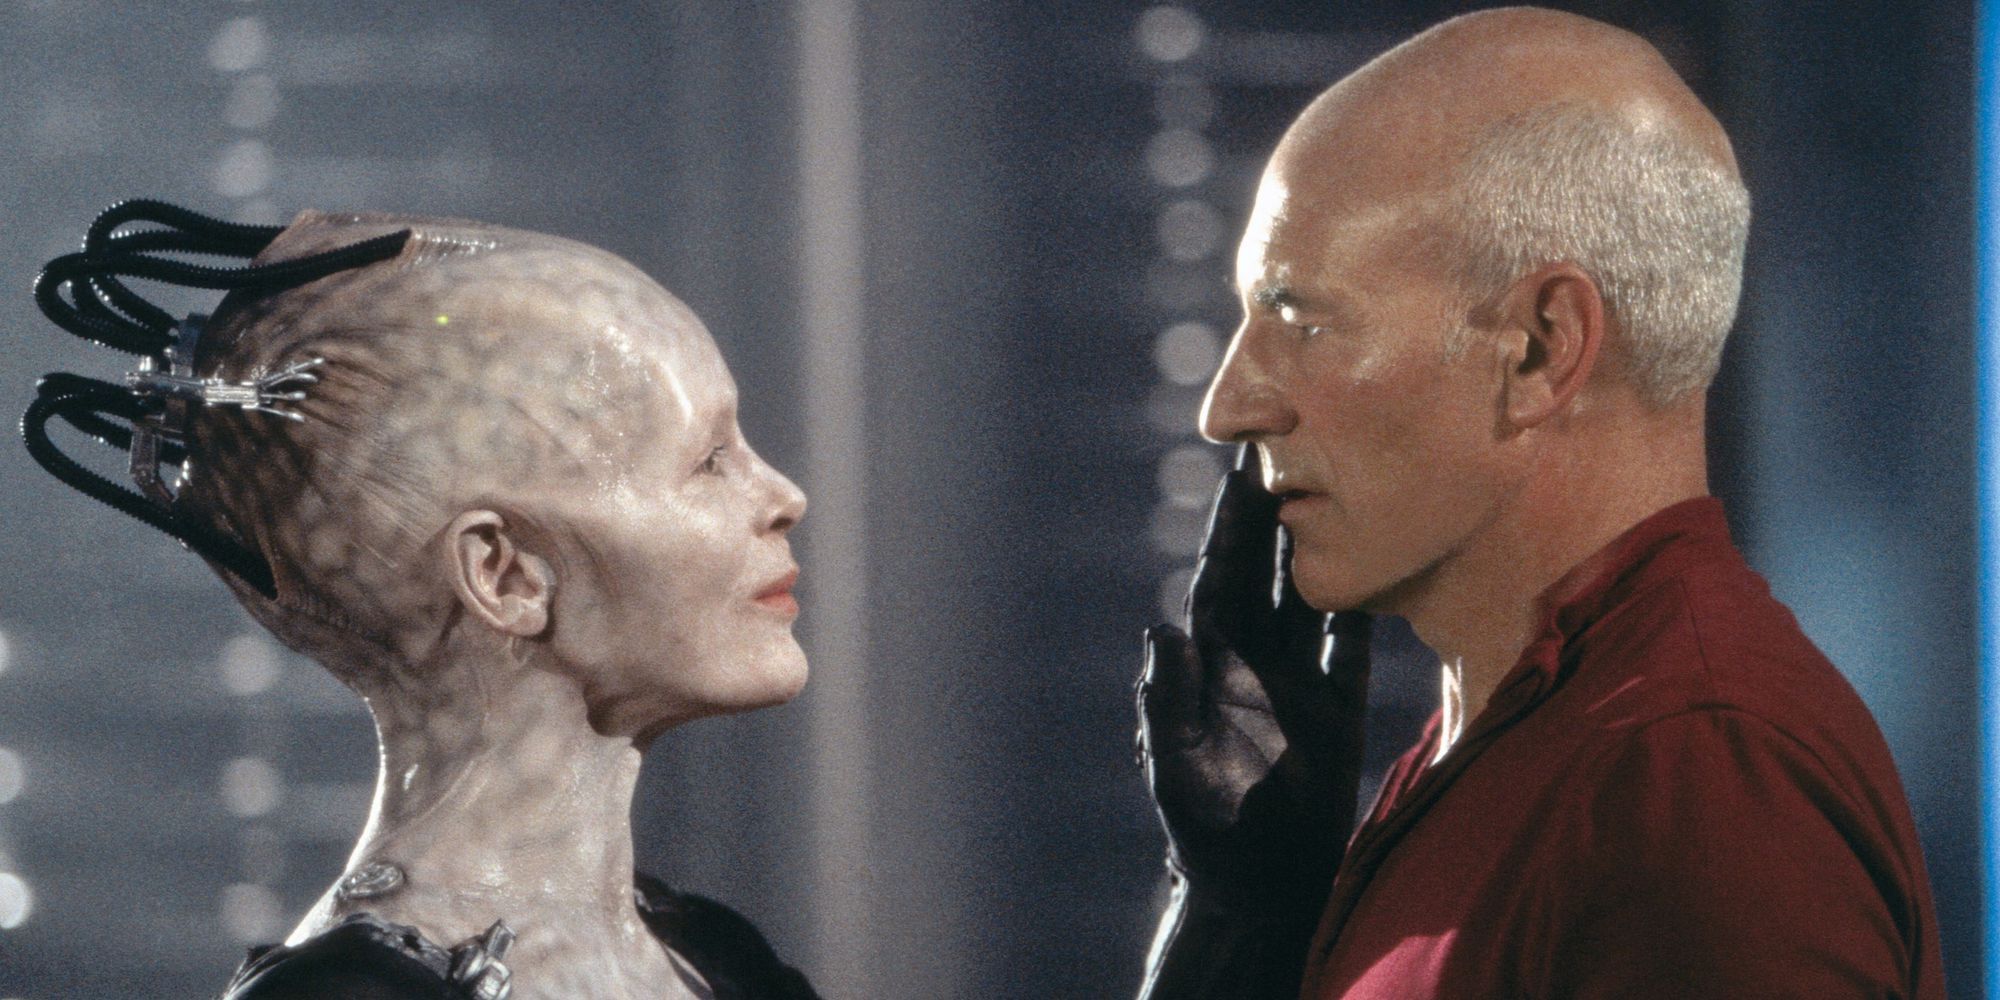 Captain Picard and the Borg Queen in Star Trek